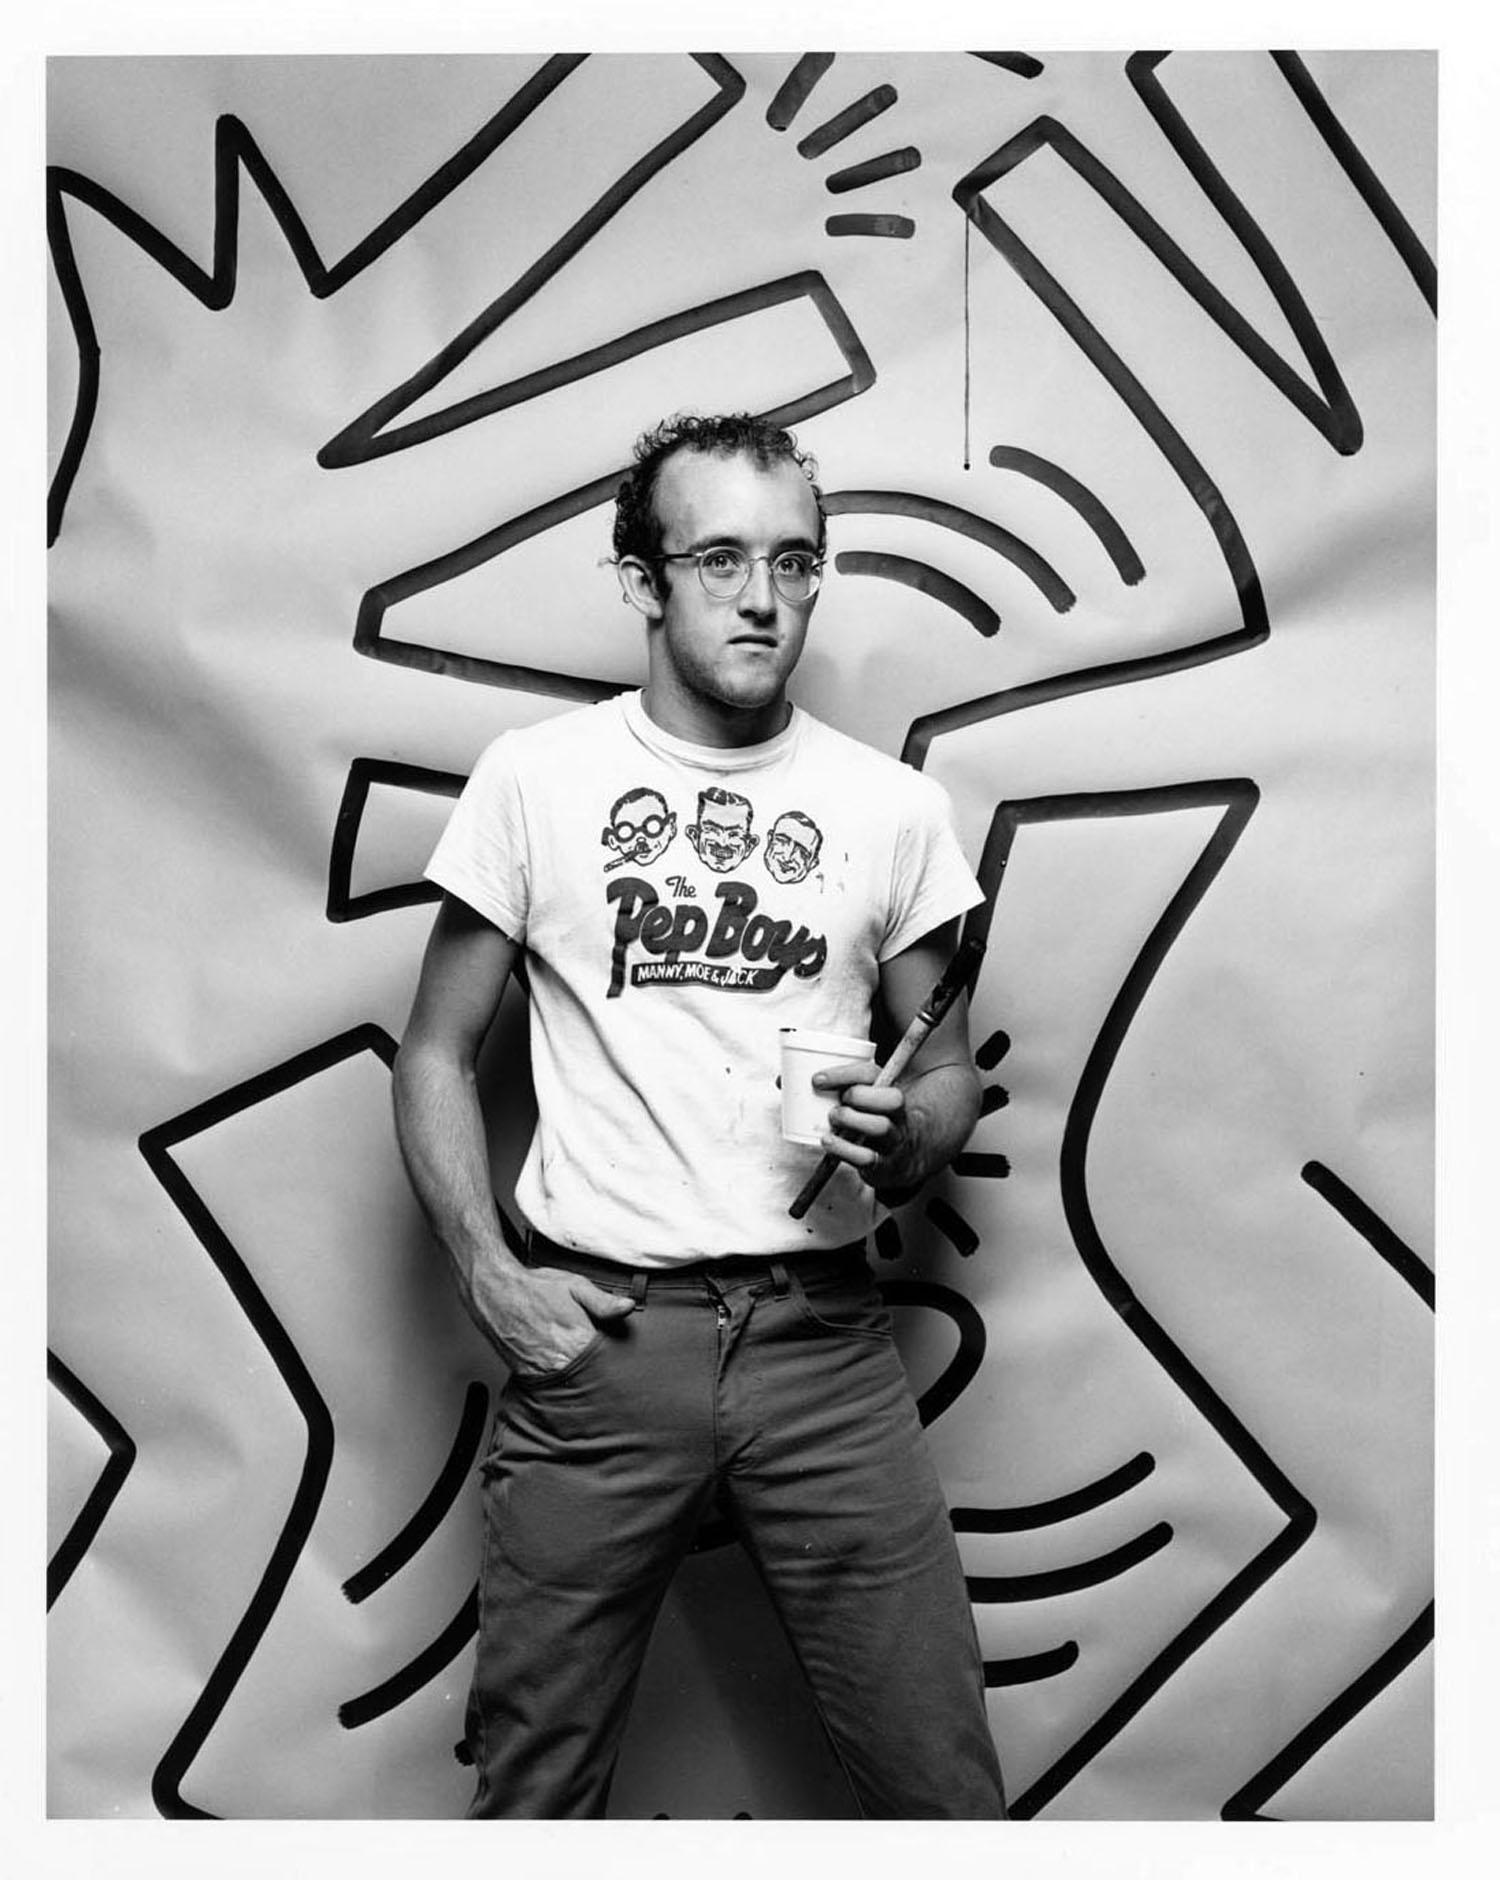 Jack Mitchell Black and White Photograph -  Graffiti Artist Keith Haring Studio Portrait with Just Completed Work